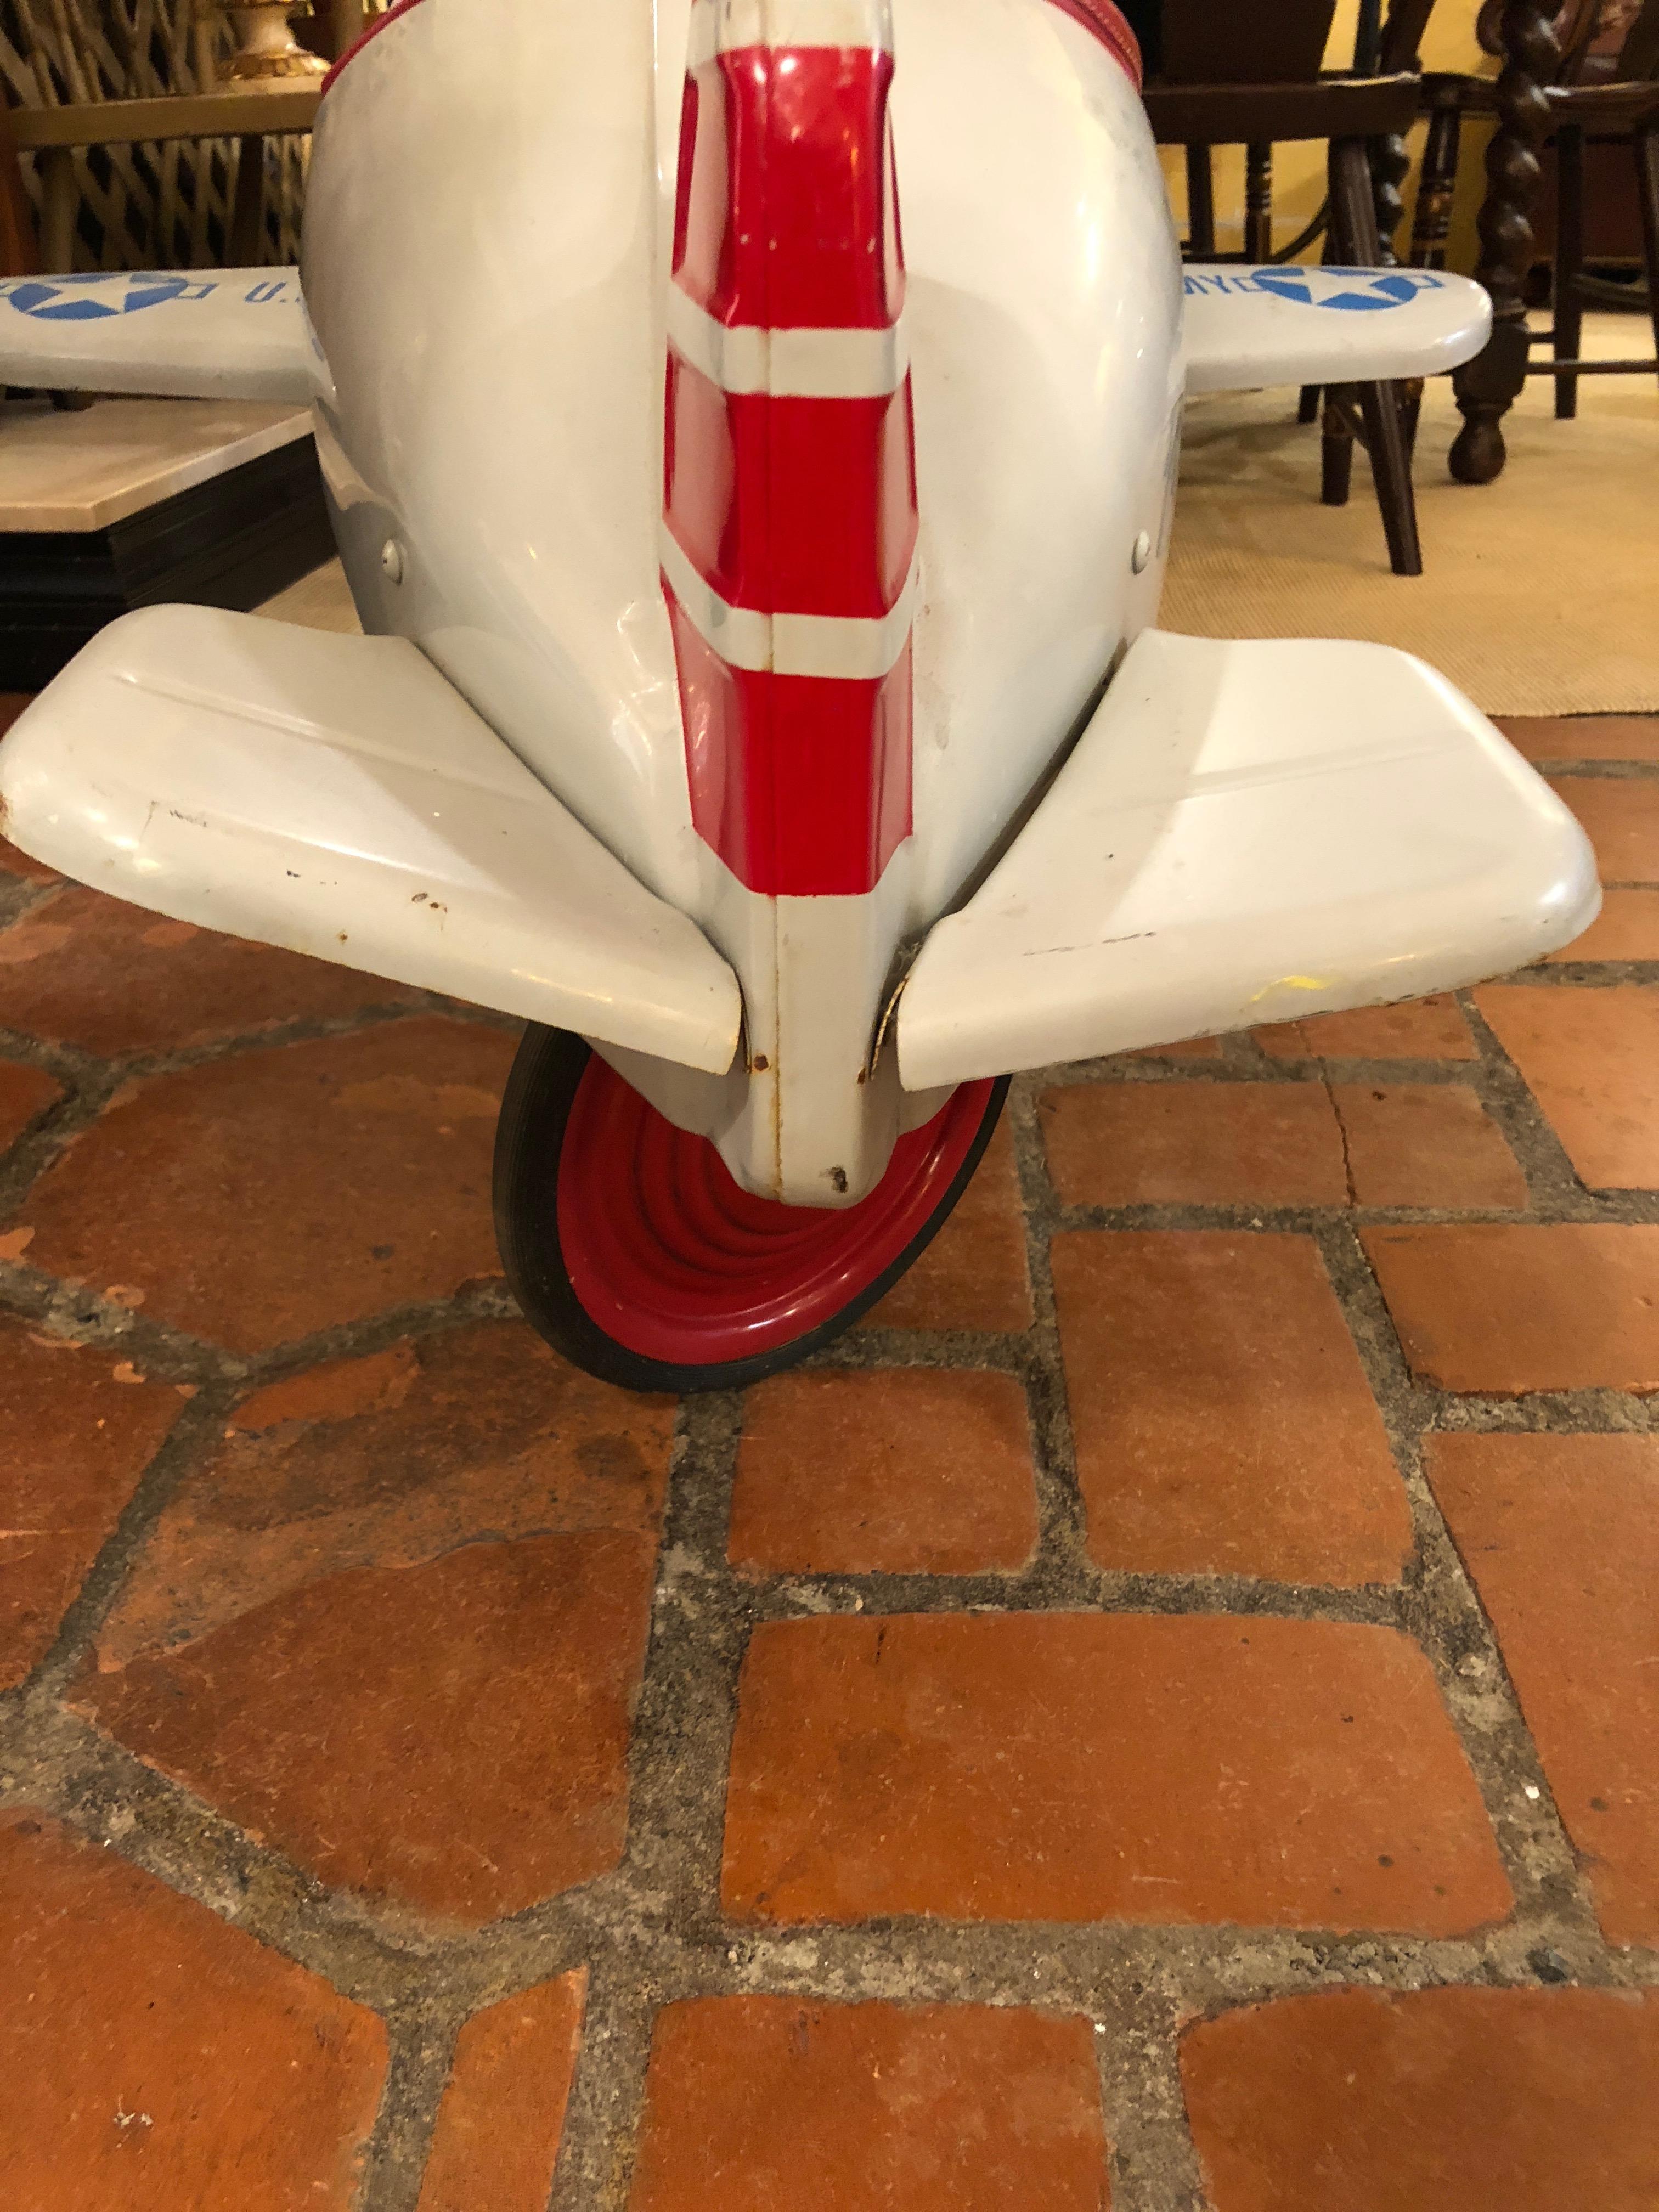 airplane pedal car for sale